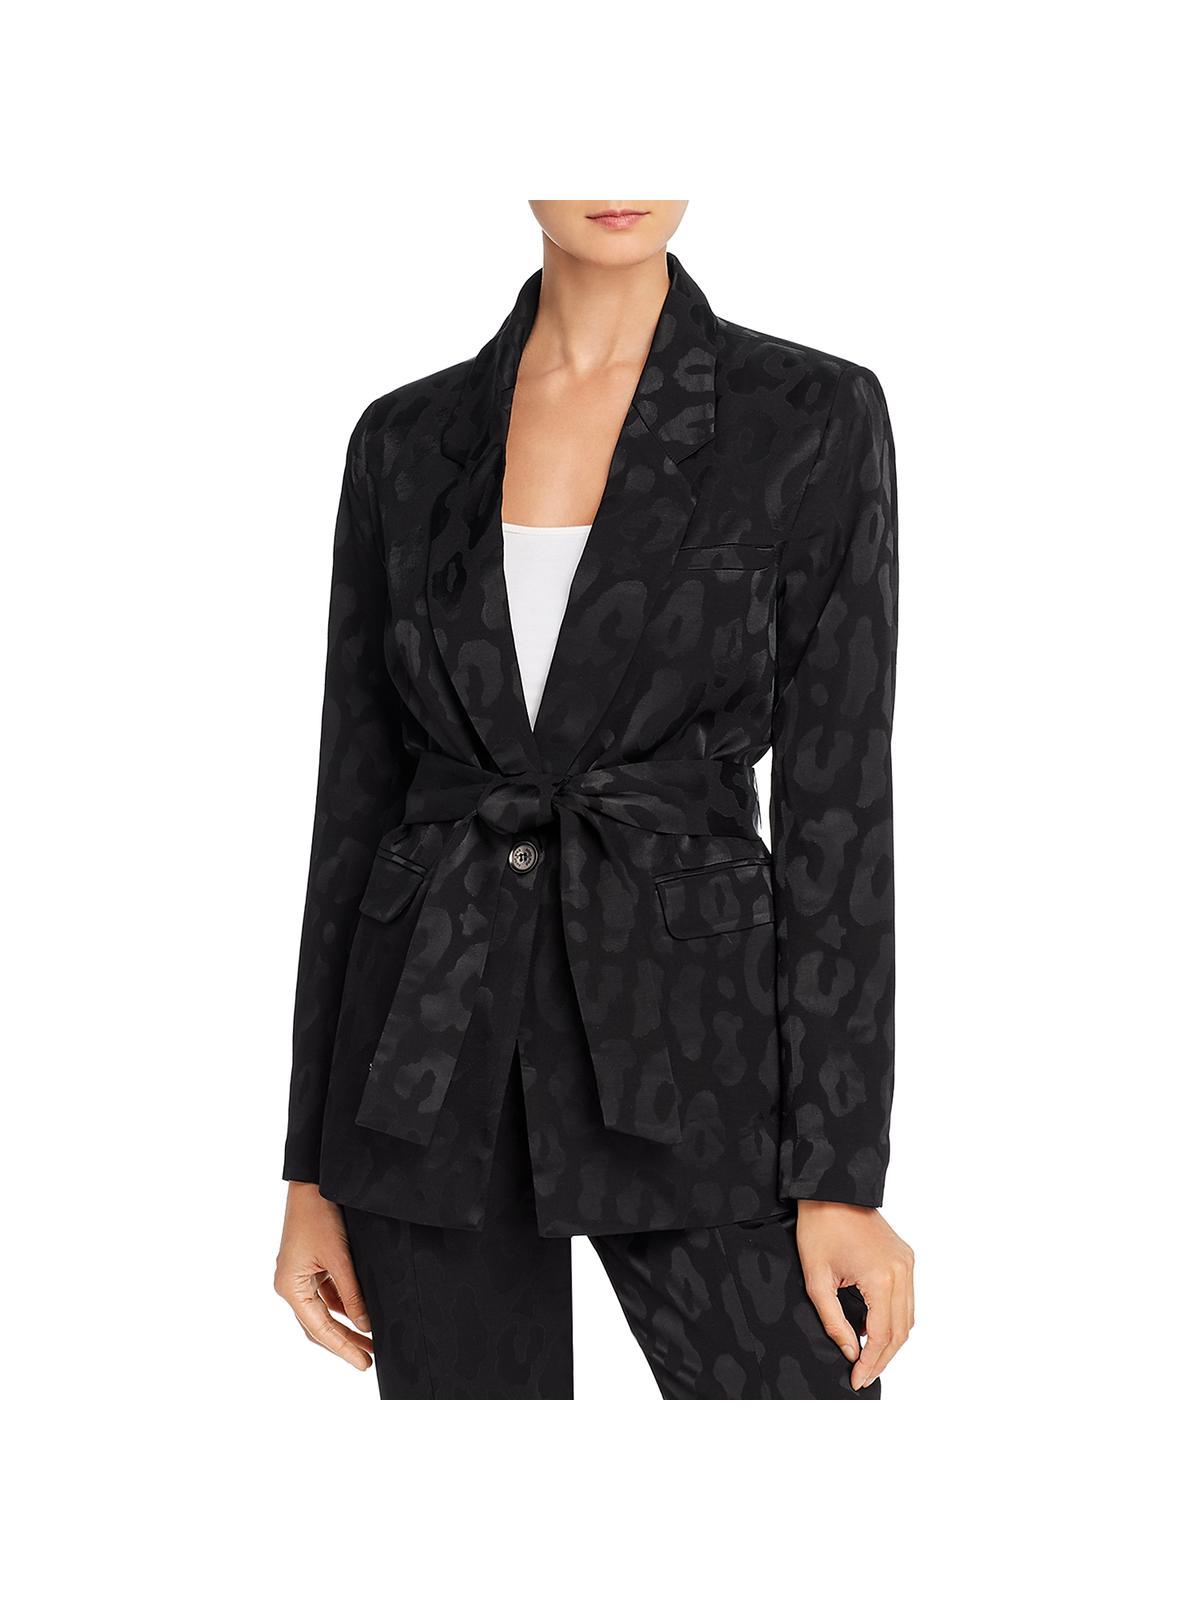 Anine Bing Tate Belted Suit Separate Blazer in Black | Lyst